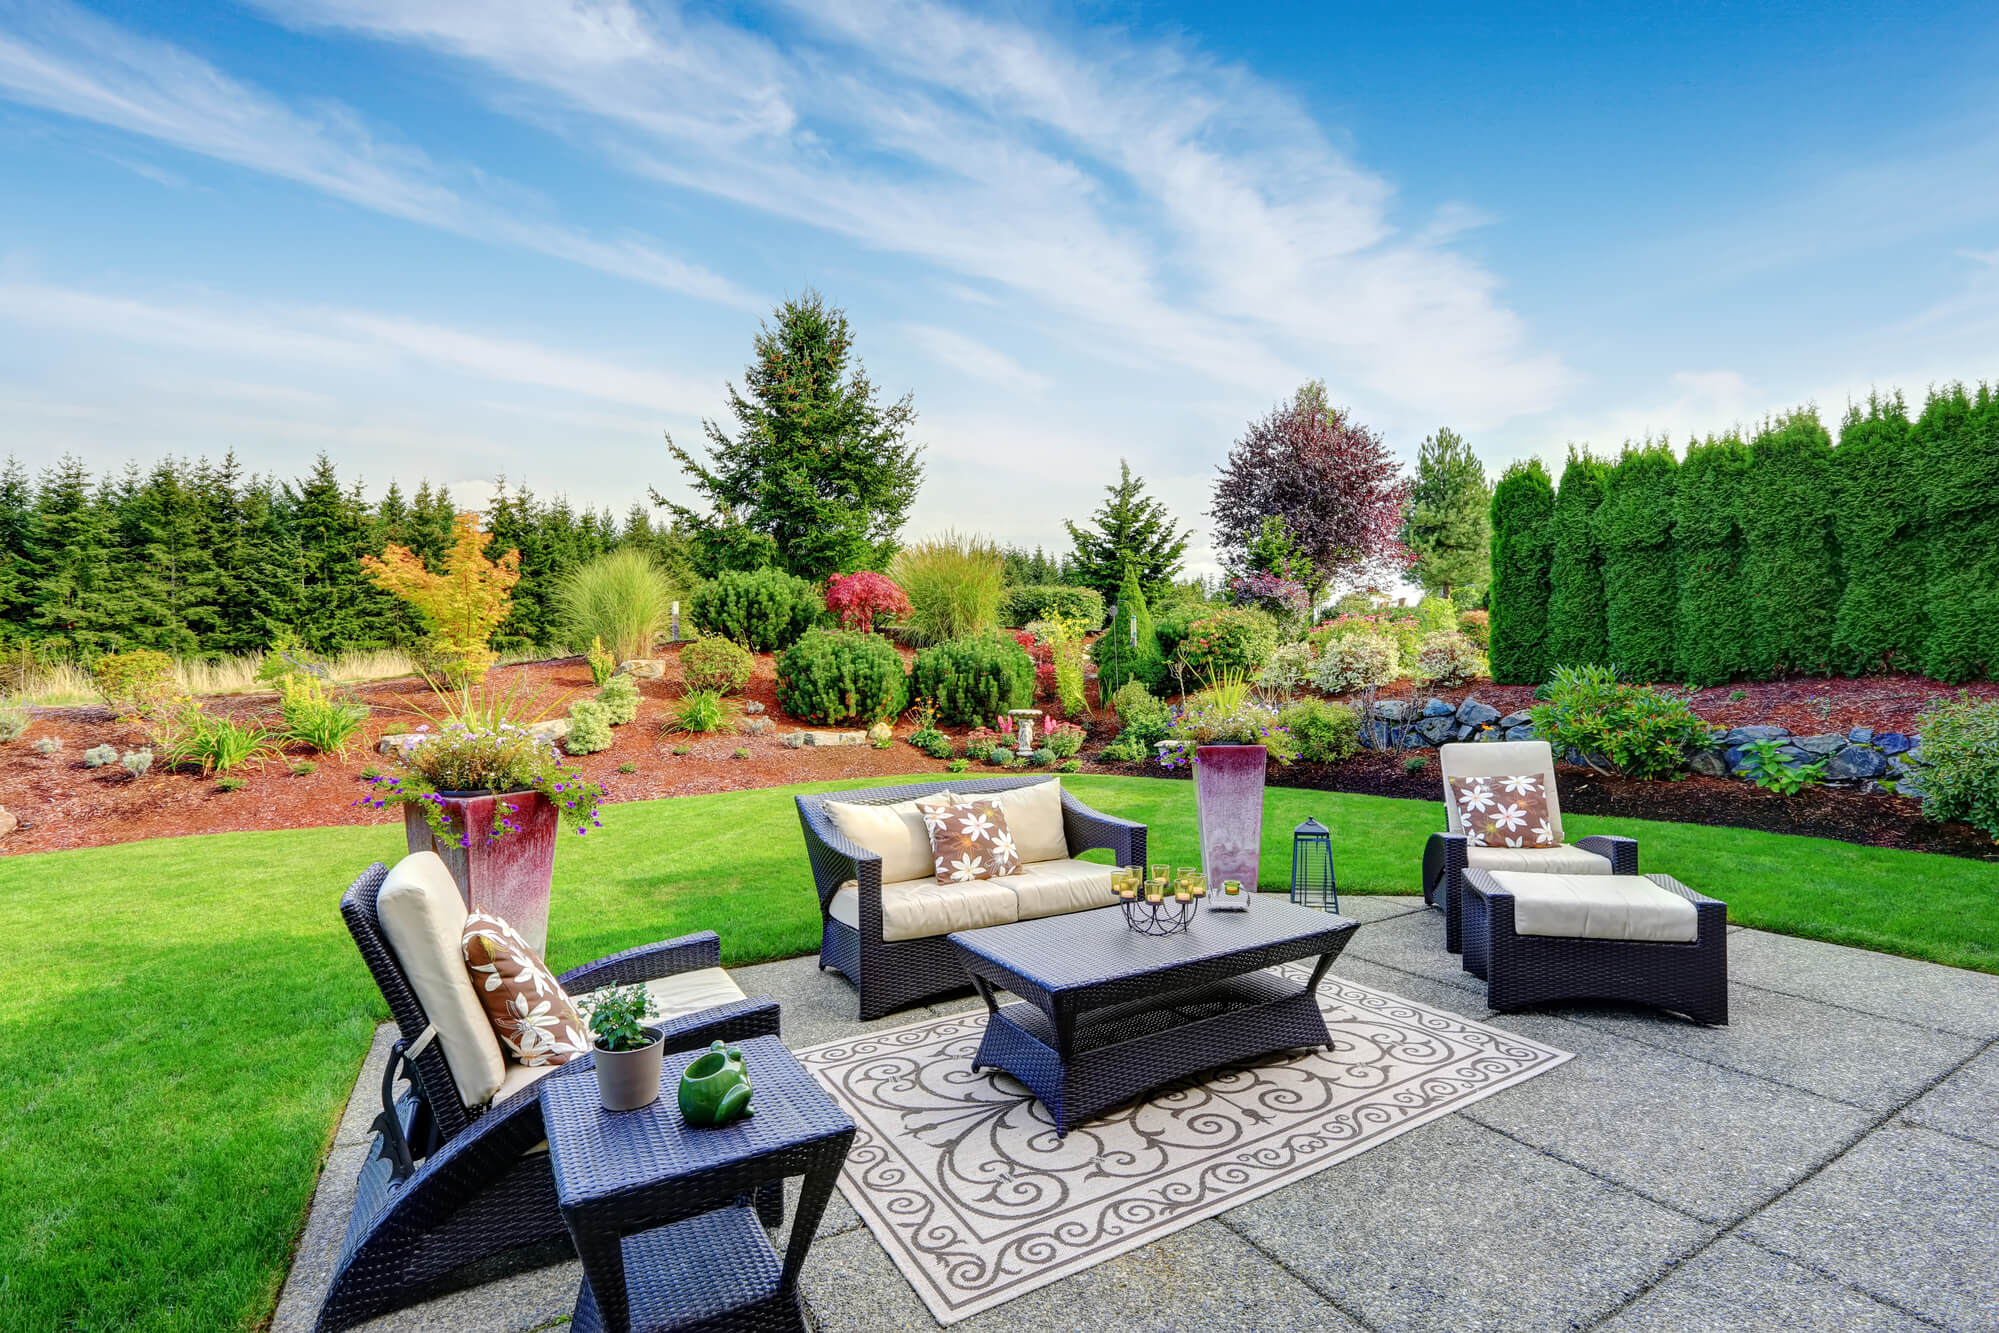 Landscaping design tips for your backyard in WA